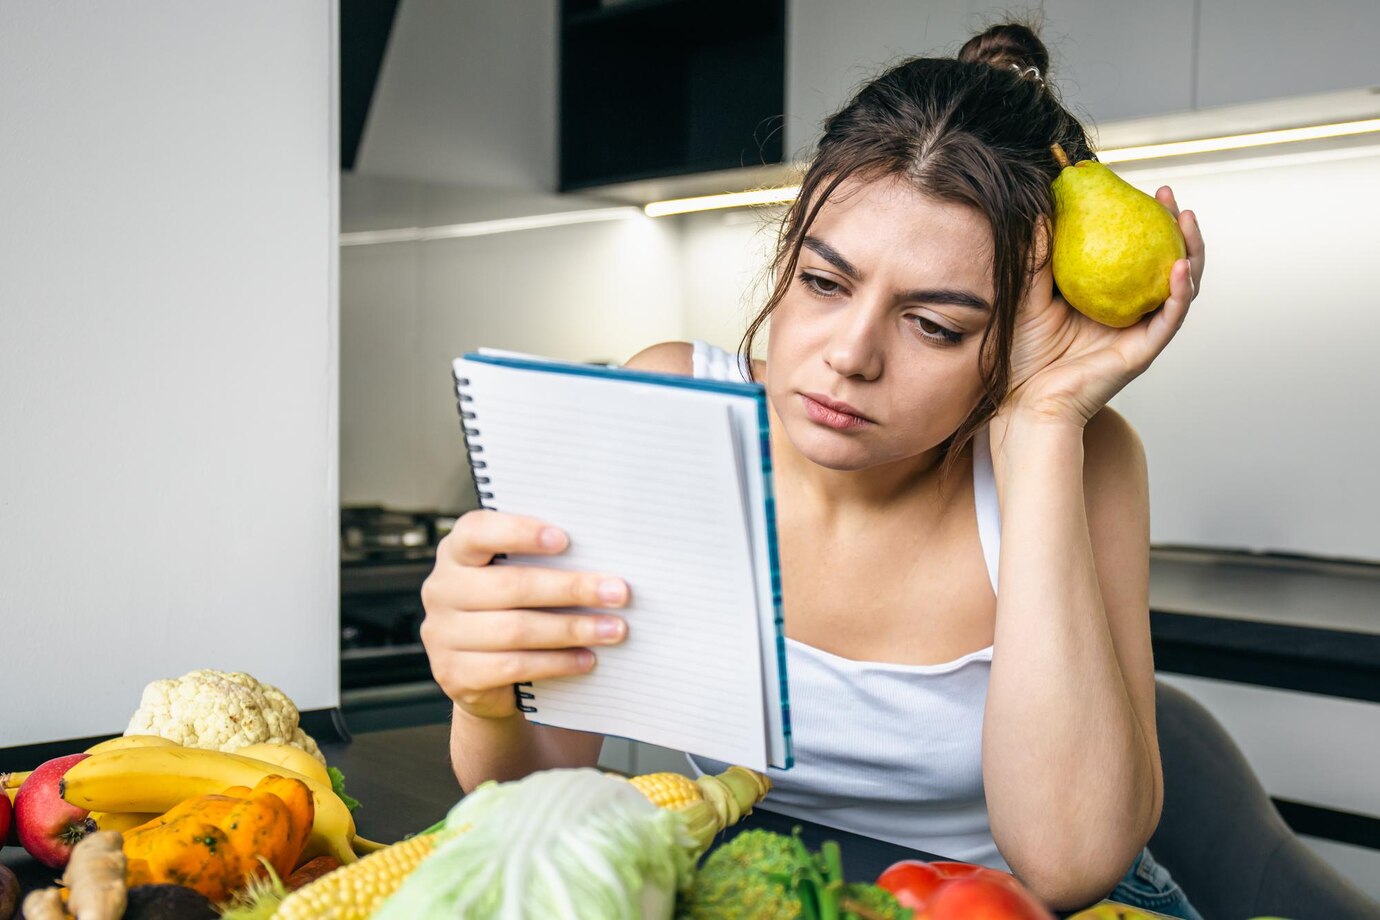 young-woman-kitchen-with-notebook-among-vegetables_169016-24203